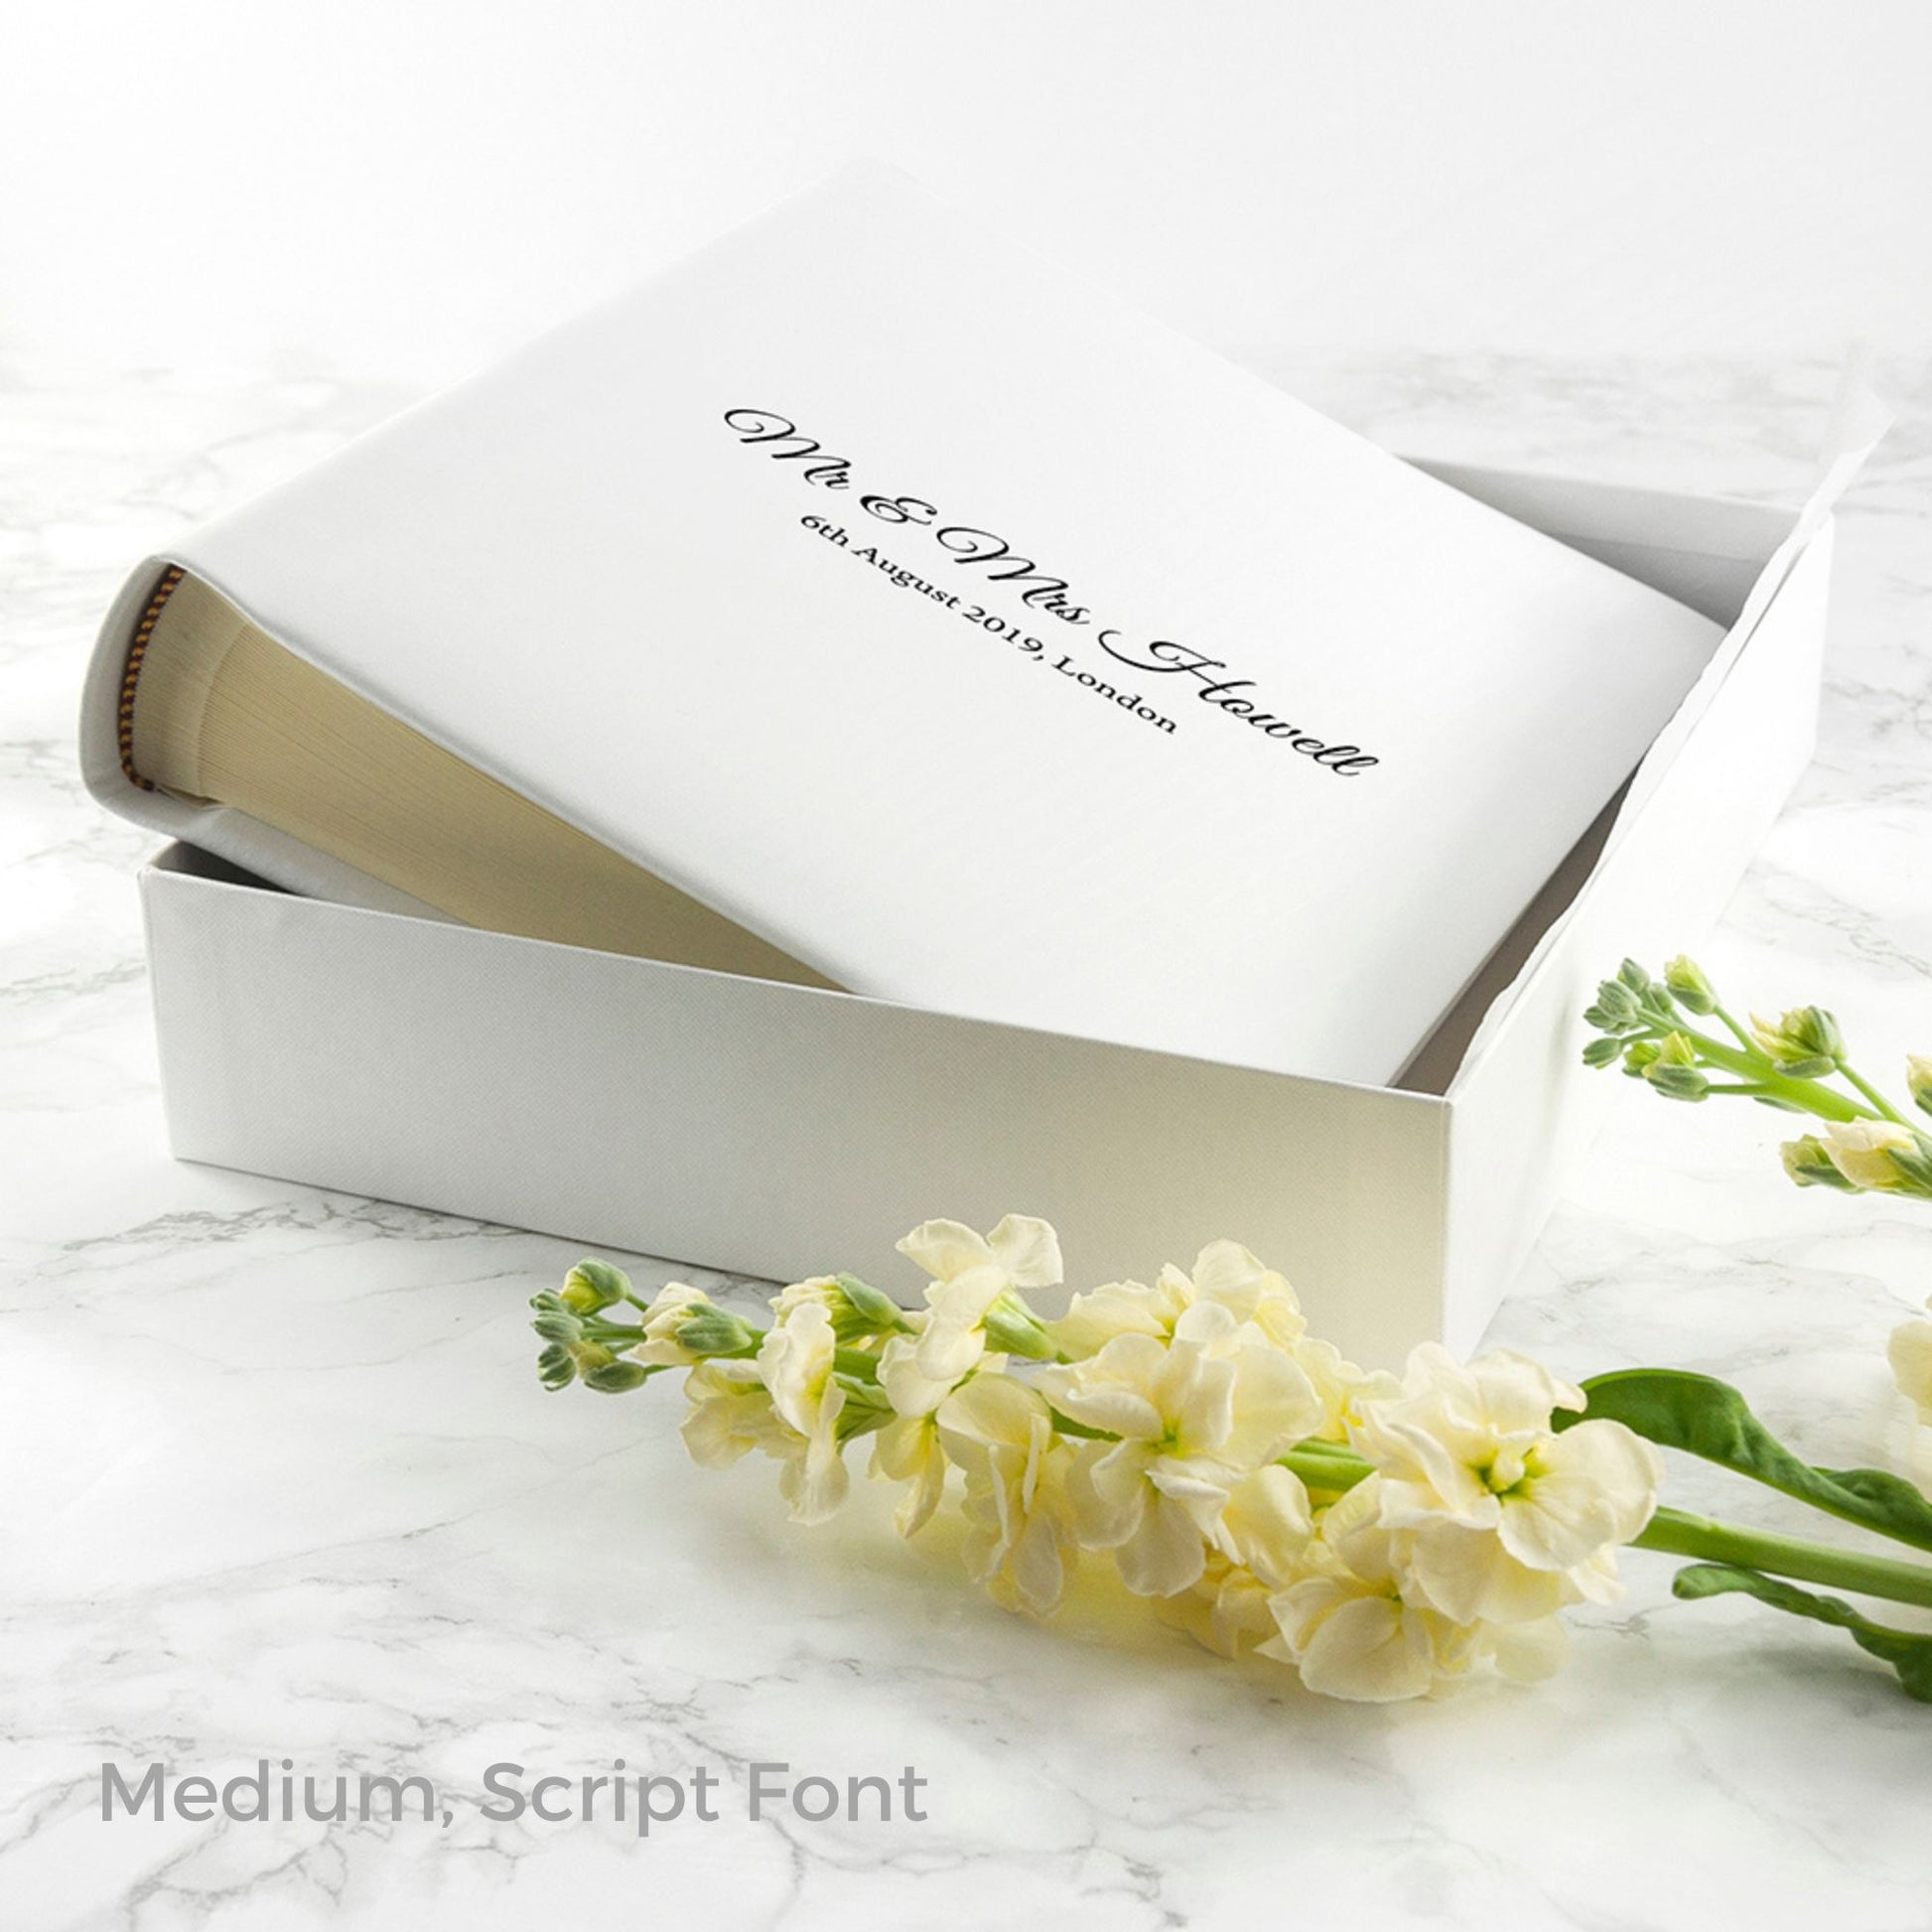 Wedding photo album handmade from luxuriously soft Dream Vachetta Italian leather. High quality interior with interleaved glassine pages .Presented in a white gift box.